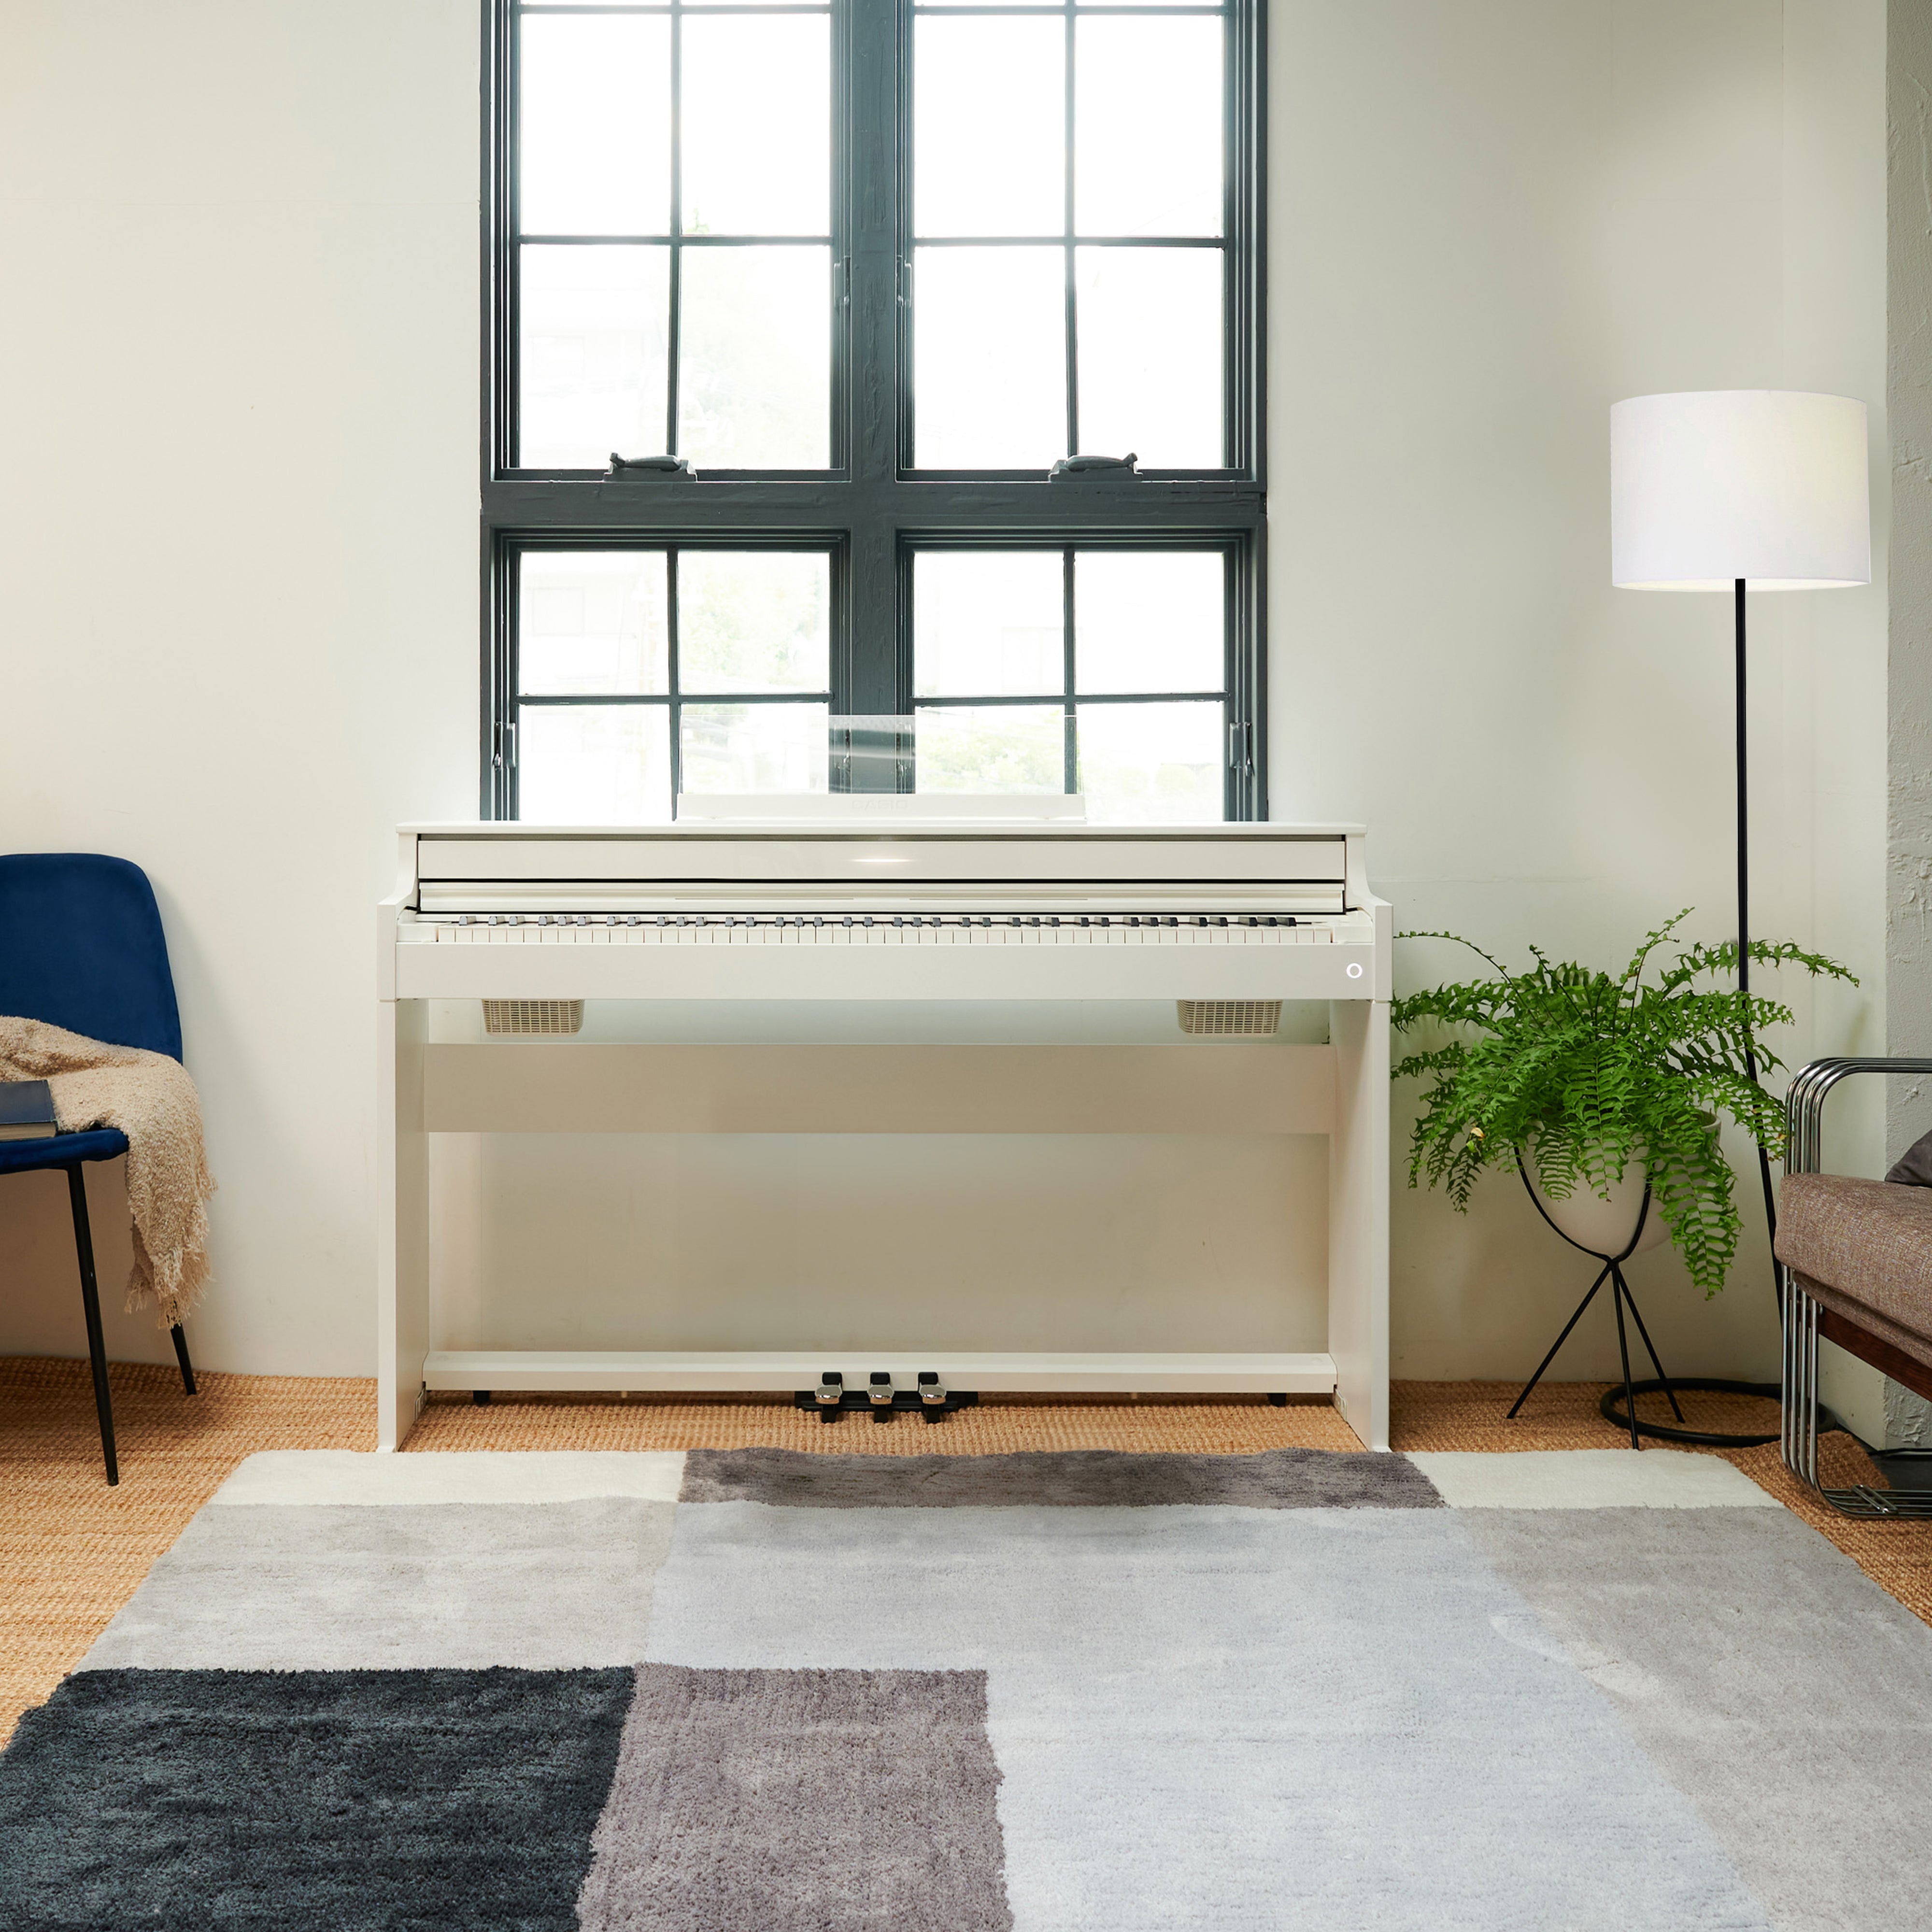 Casio Celviano AP-S450 Digital Piano - White - front view in a quaint living space